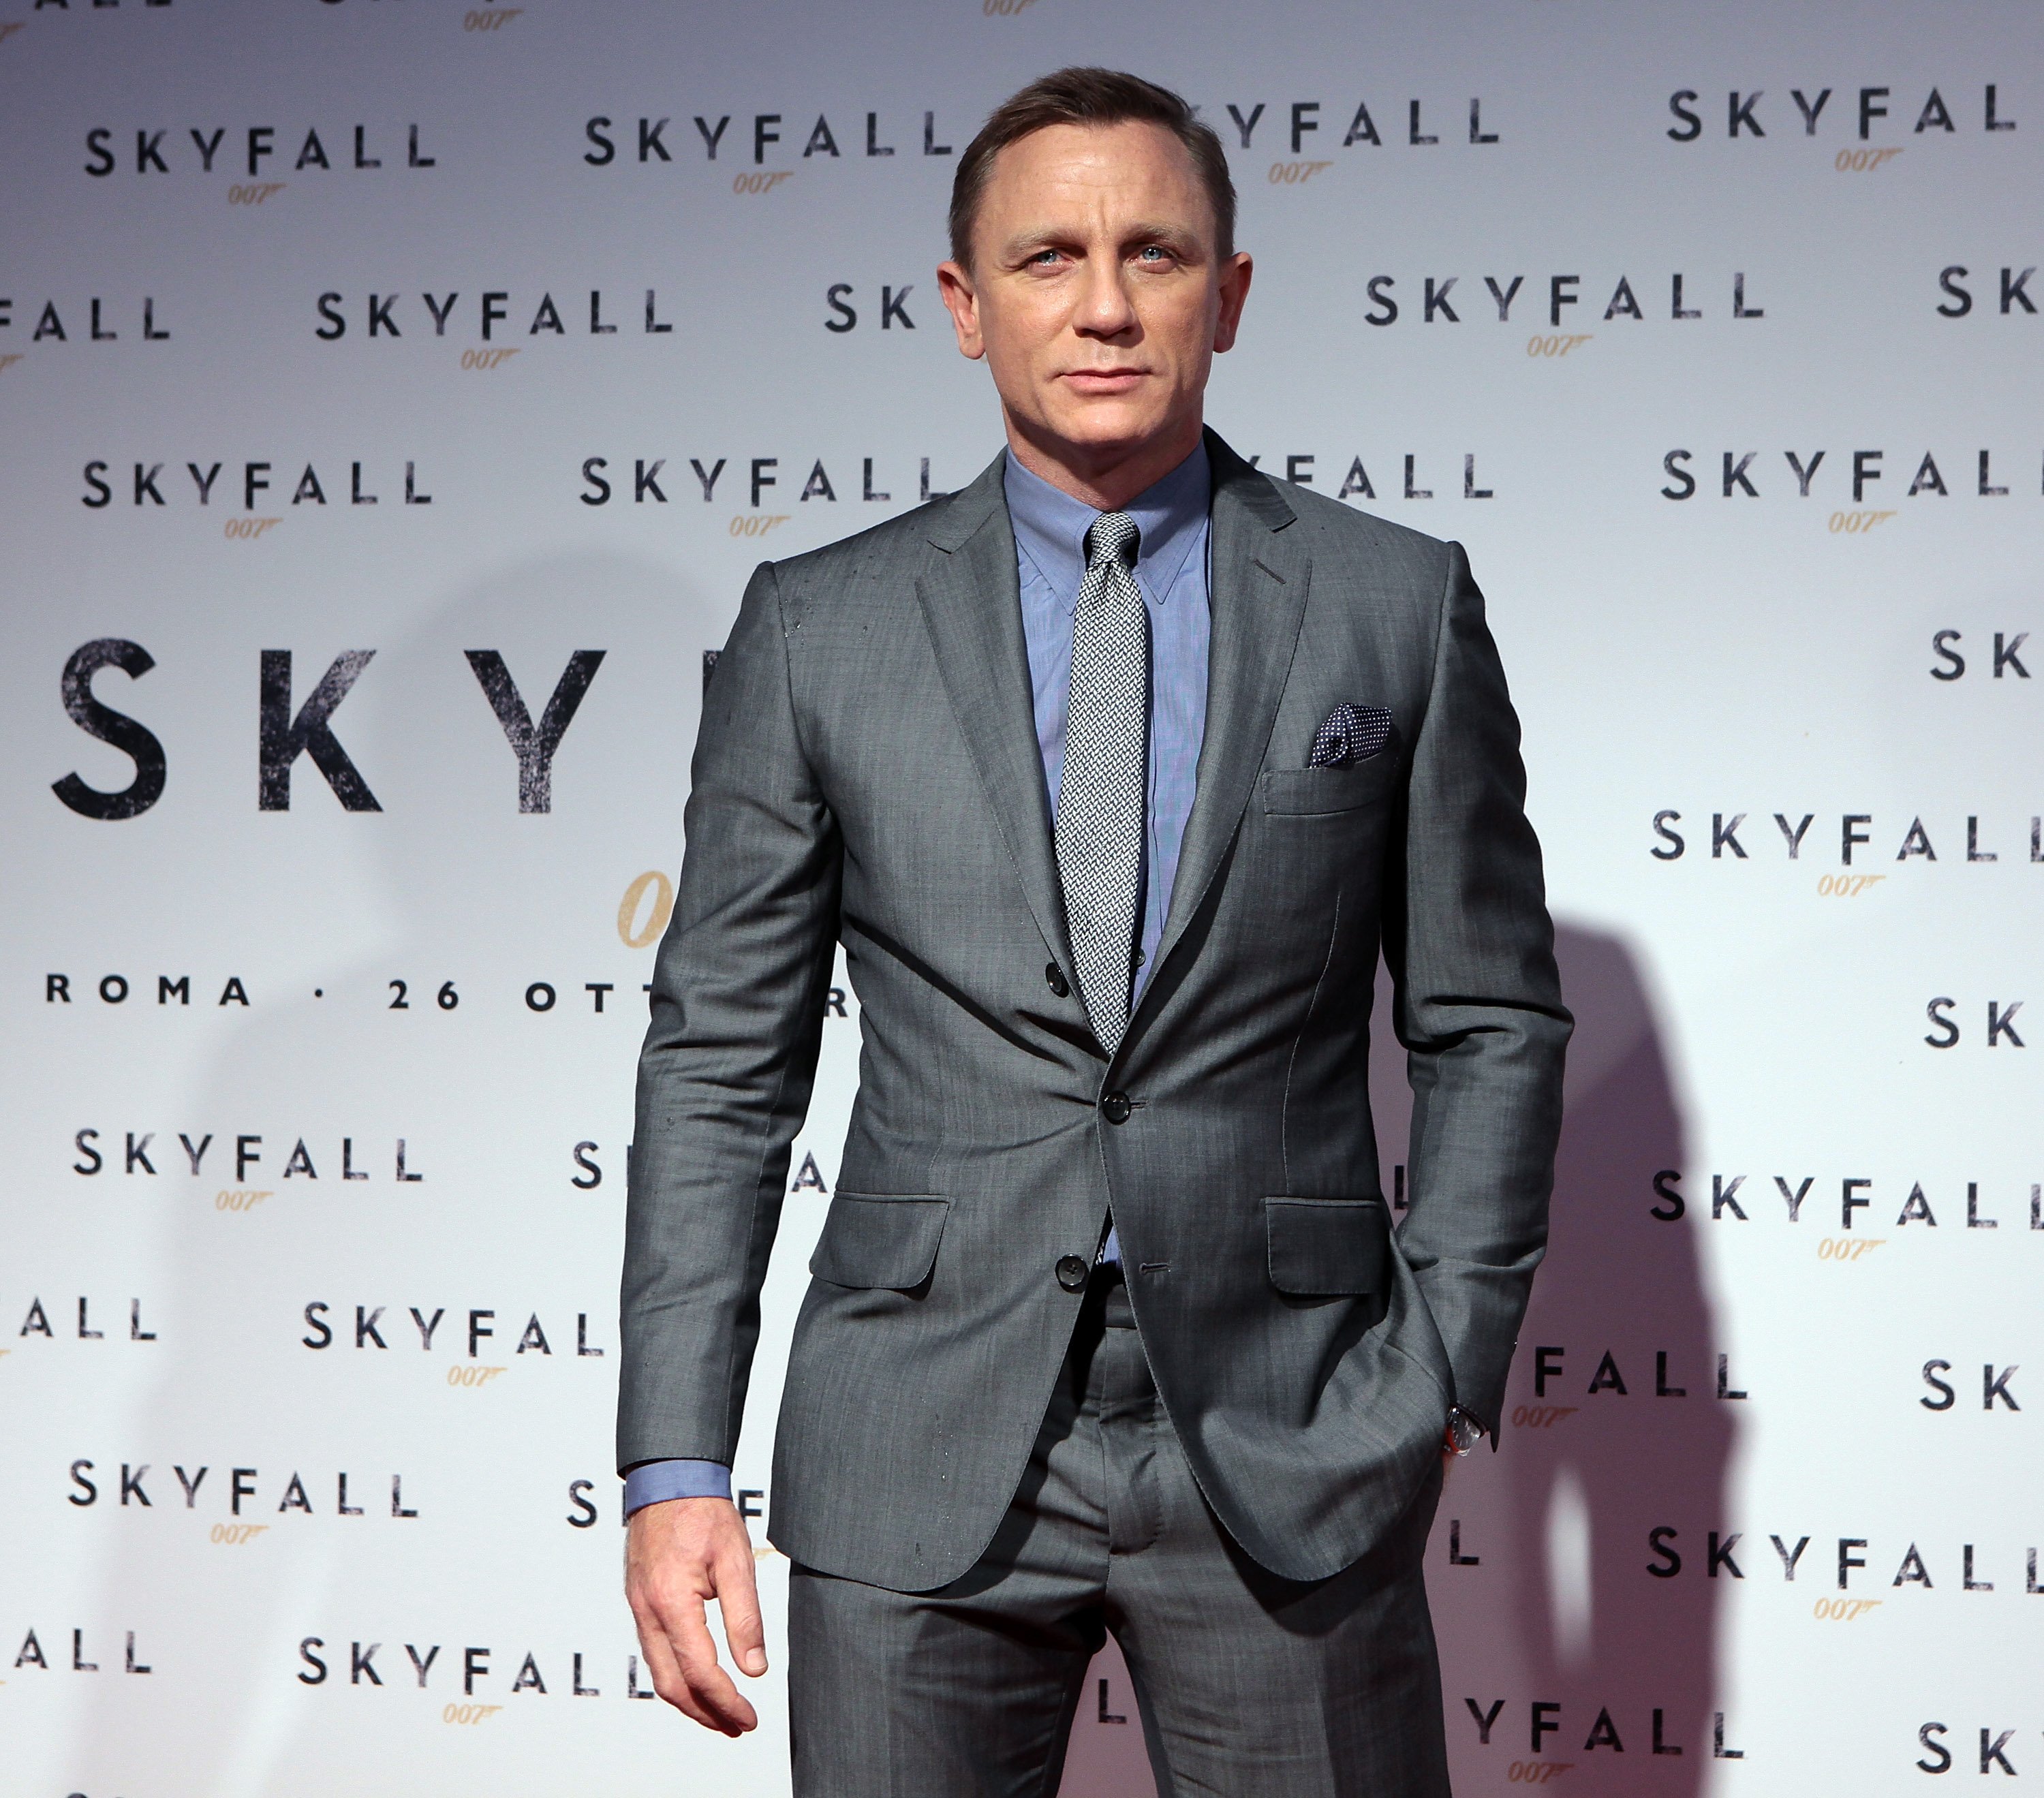 Daniel Craig attends the premiere of "Skyfall" in Rome, Italy on October 26, 2012 | Photo: Getty Images